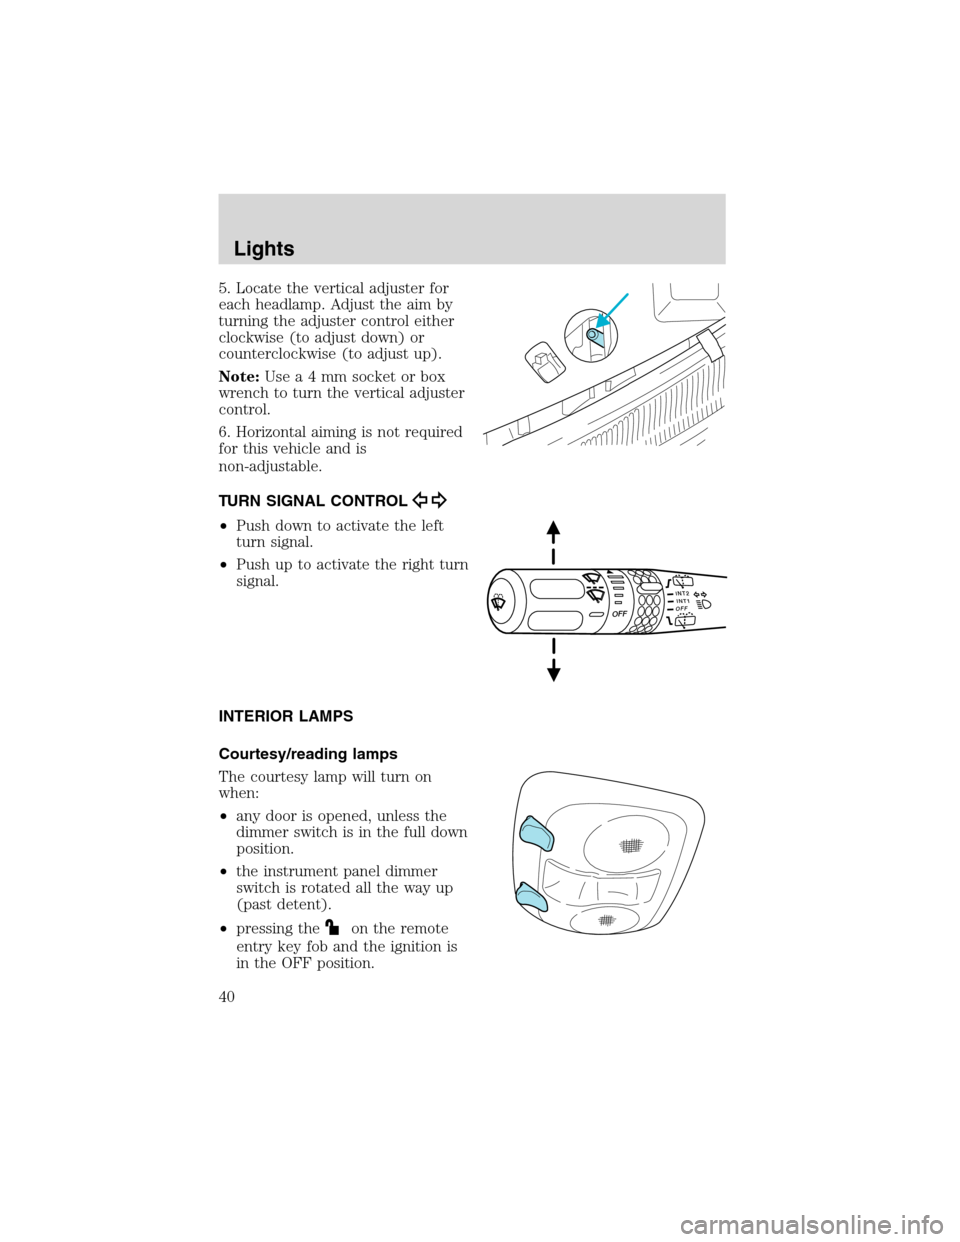 Mercury Mountaineer 2003  Owners Manuals 5. Locate the vertical adjuster for
each headlamp. Adjust the aim by
turning the adjuster control either
clockwise (to adjust down) or
counterclockwise (to adjust up).
Note:Usea4mmsocket or box
wrench